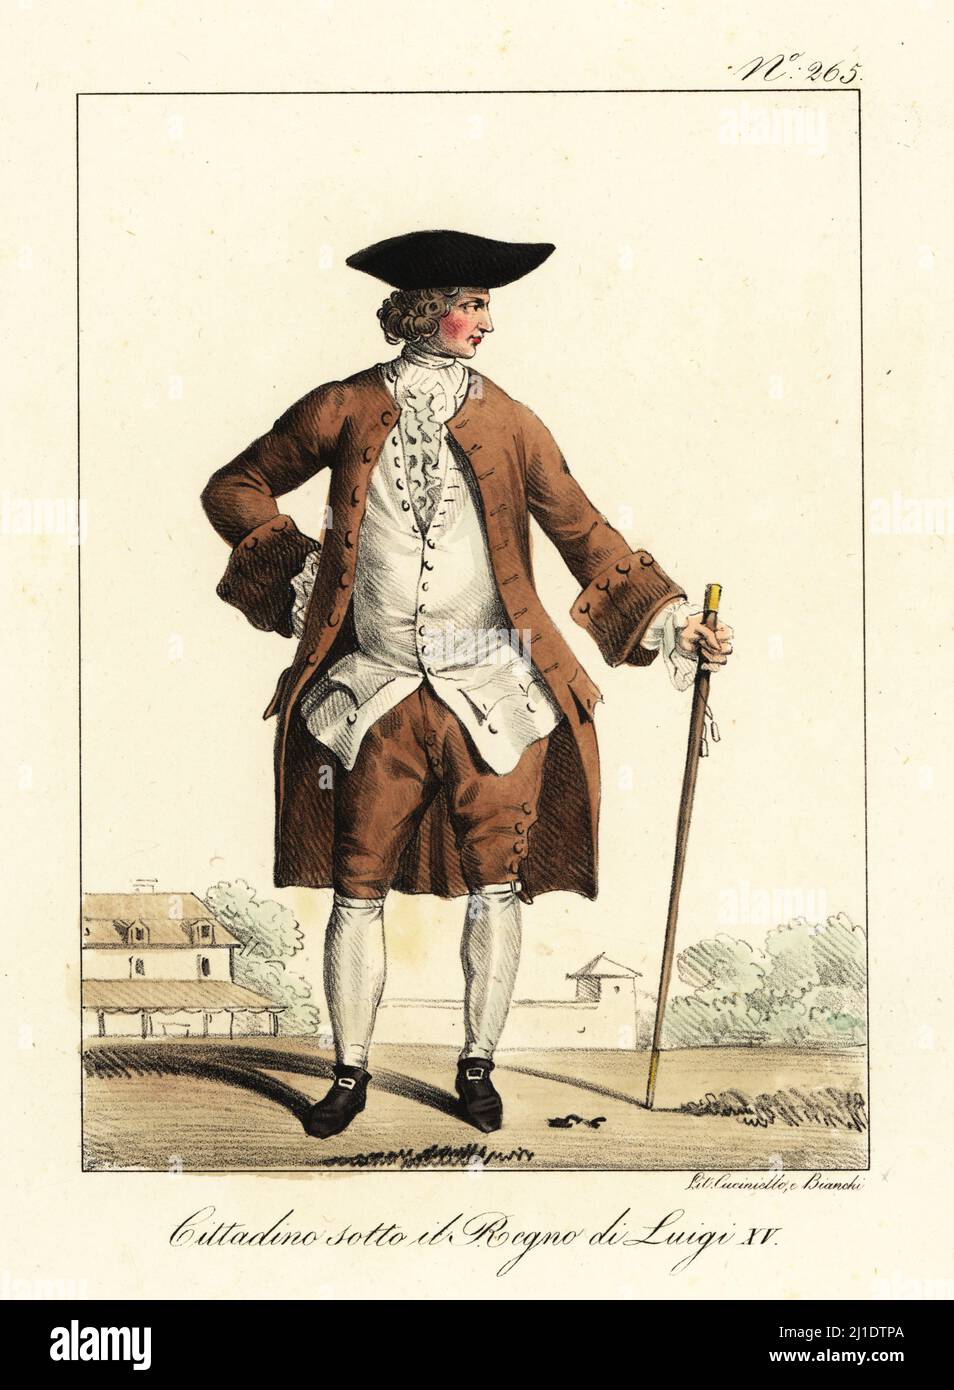 Costume of a French bourgeois man, mid-18th century. In bicorne hat, coat, waistcoat and breeches, buckle shoes, with cane. Bourgeois sous le Regne de Louis XV. Handcoloured lithograph by Lorenzo Bianchi and Domenico Cuciniello after Hippolyte Lecomte from Costumi civili e militari della monarchia francese dal 1200 al 1820, Naples, 1825. Italian edition of Lecomte’s Civilian and military costumes of the French monarchy from 1200 to 1820. Stock Photo